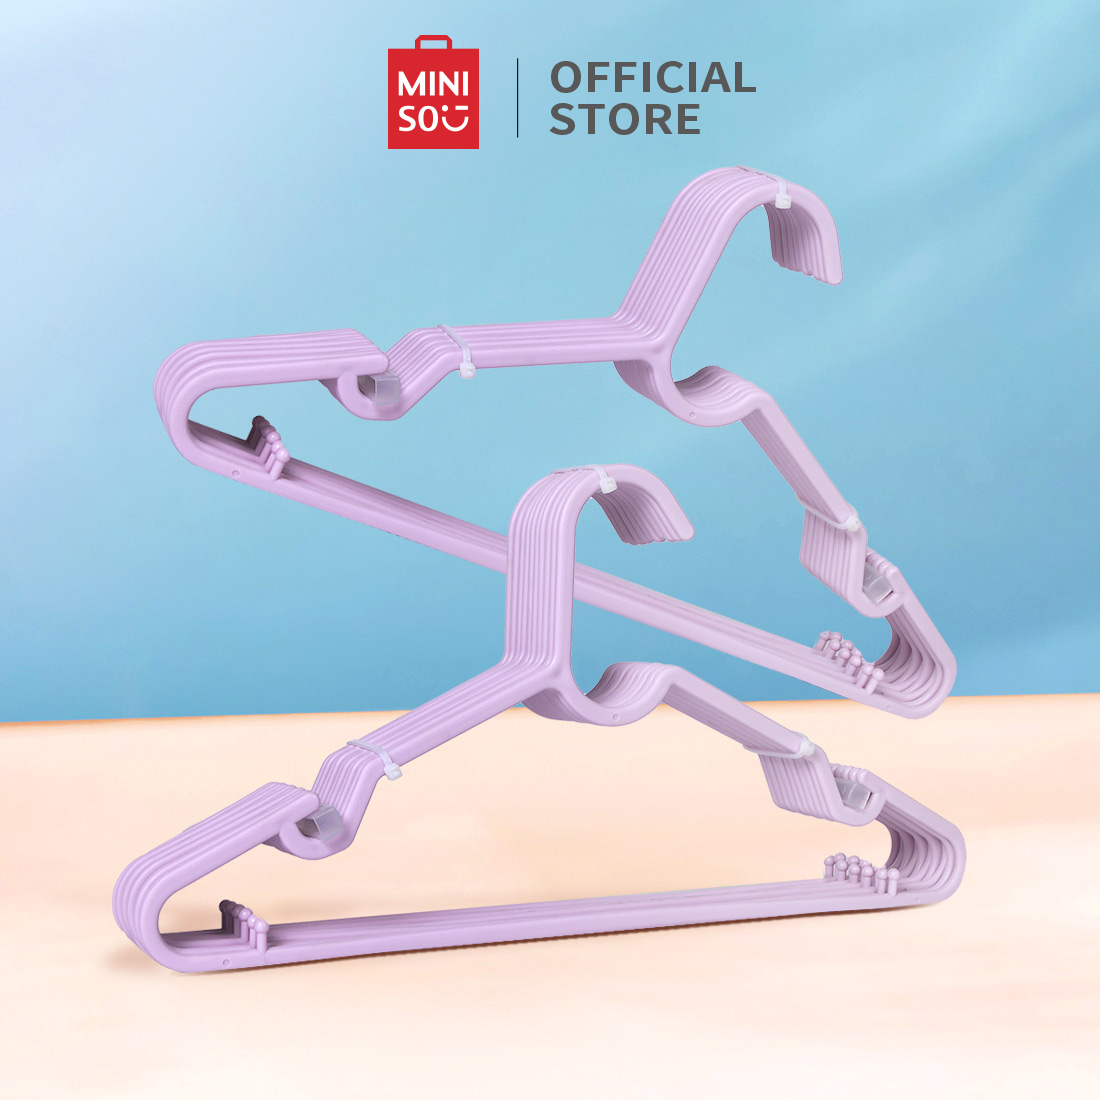 MINISO Simple Plastic Clothes Hanger 20 PCS,Clothes Hanger for Wardrobe,Dual Use for Hanging Summer Cloths and Durable PP Material,Light Purple